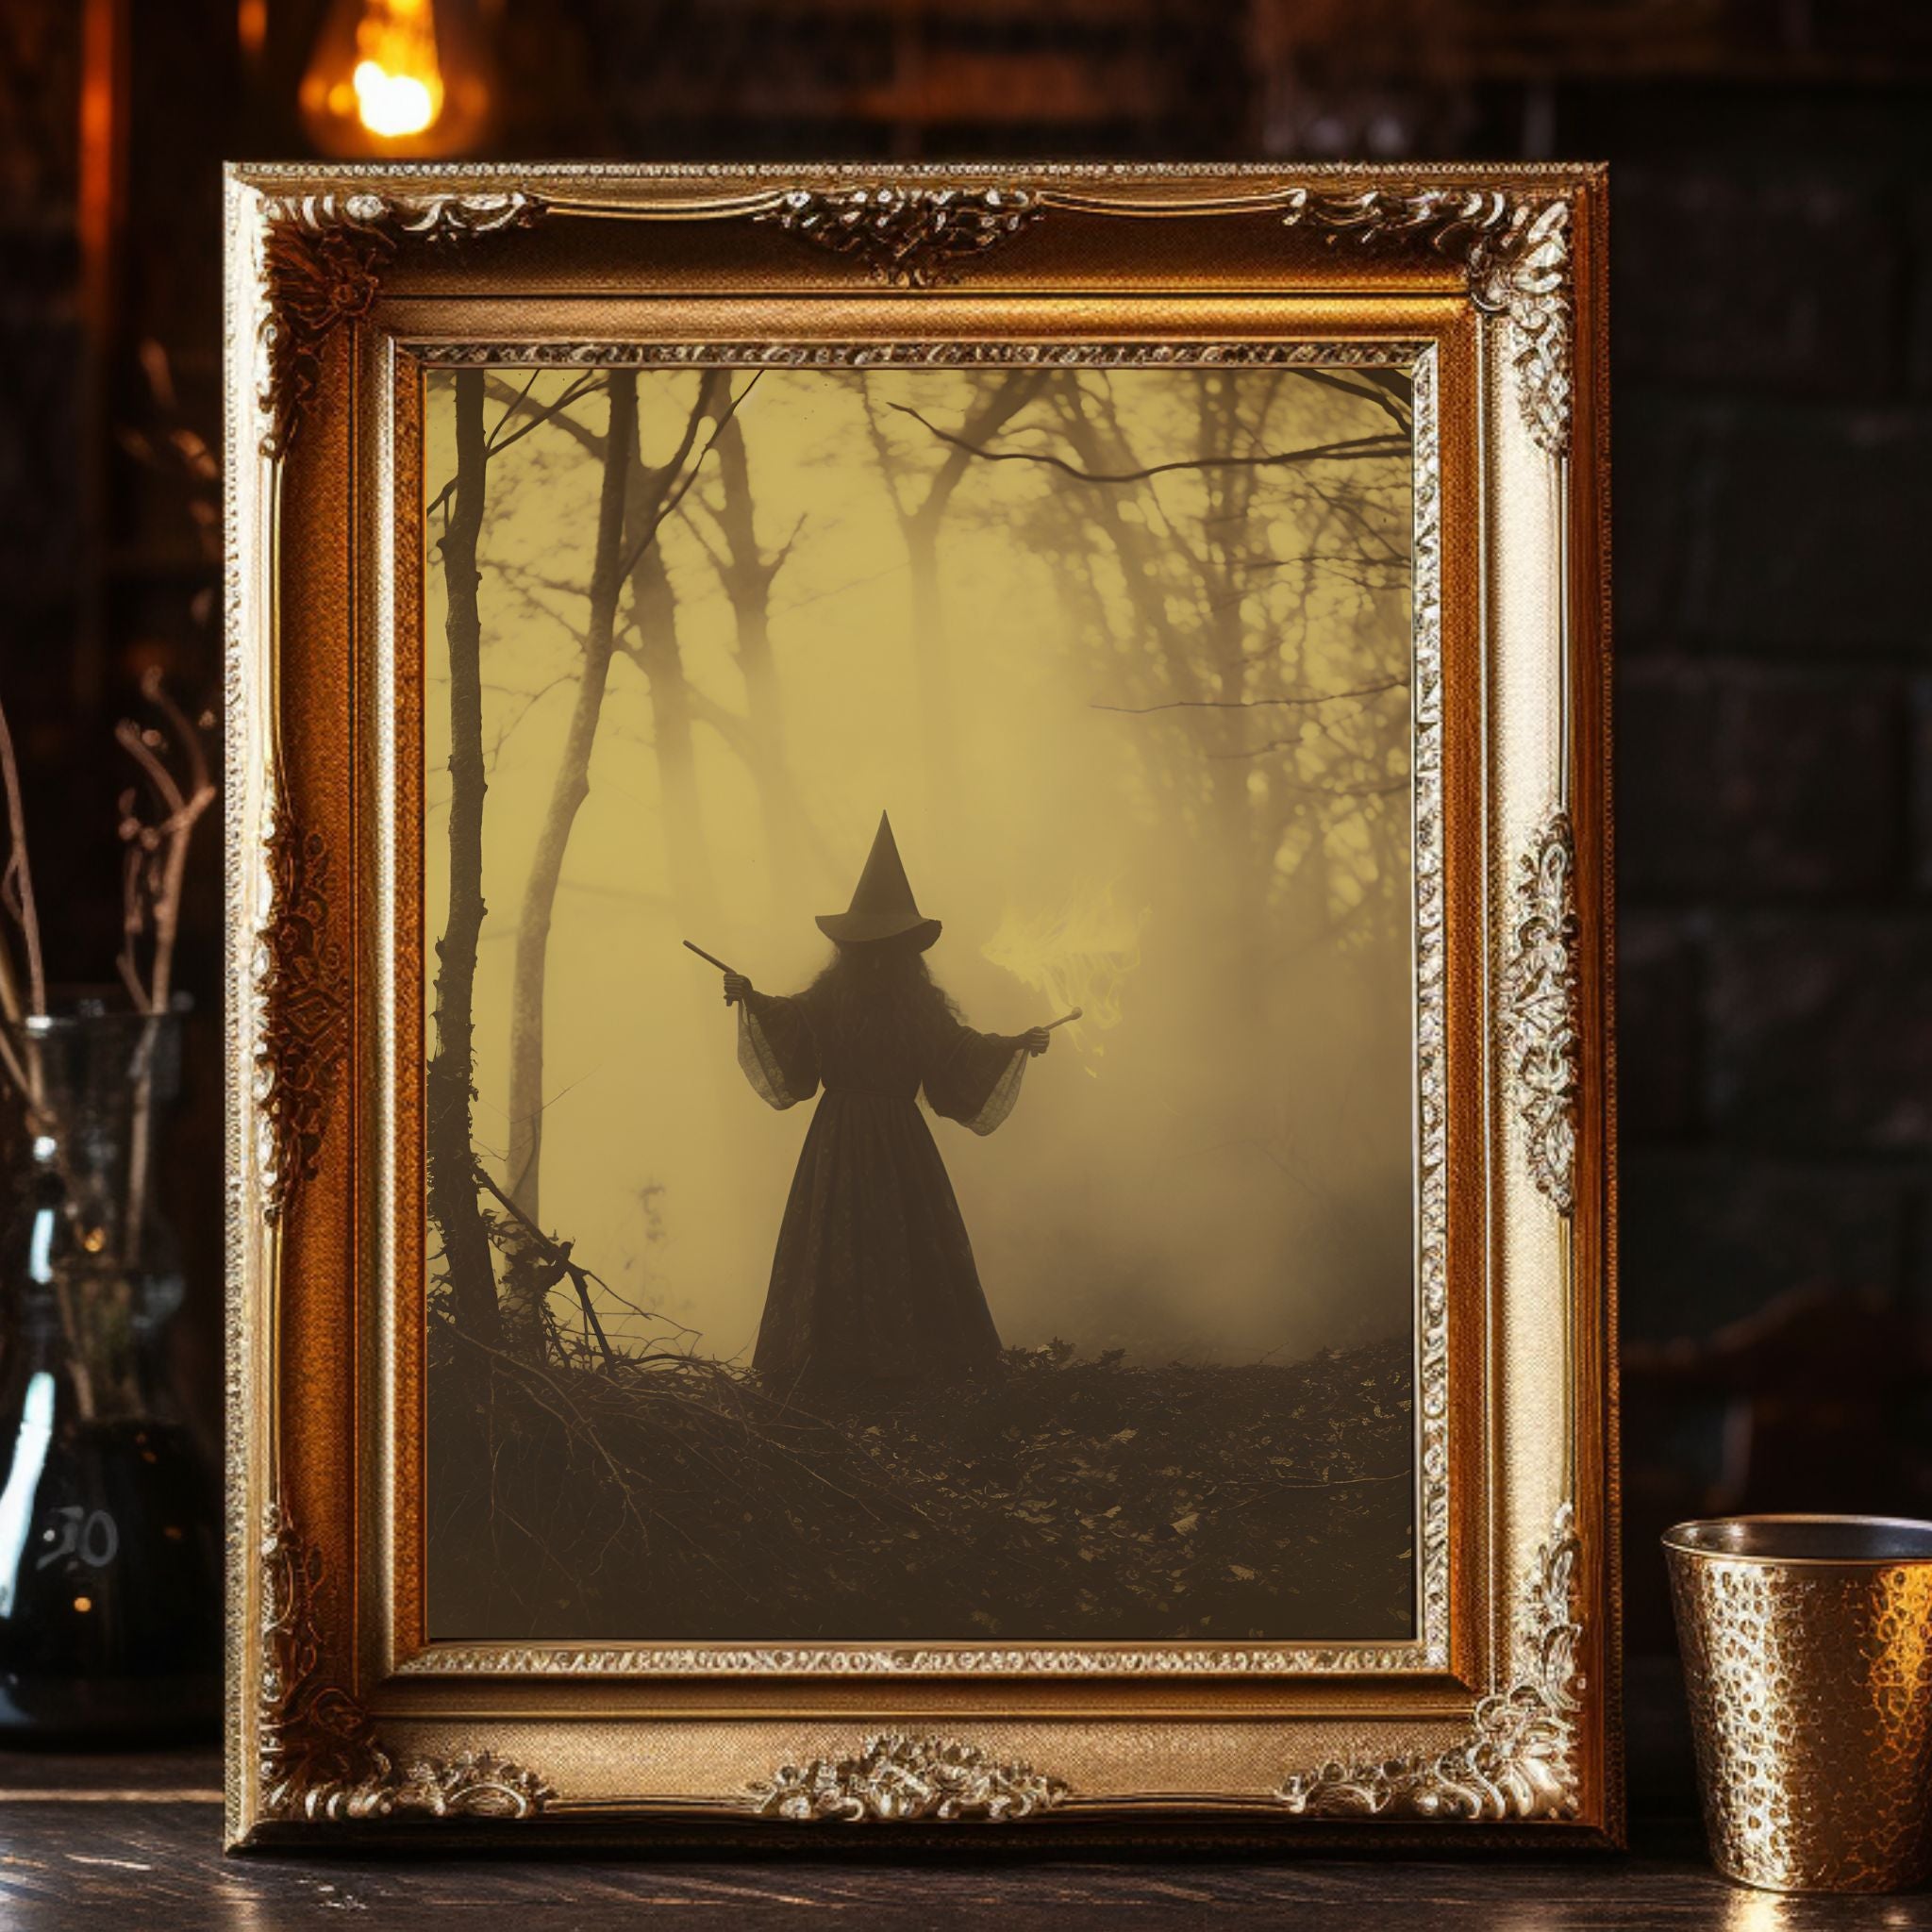 Magical Witchcraft Vintage Photography Wall Art: Occult Poster